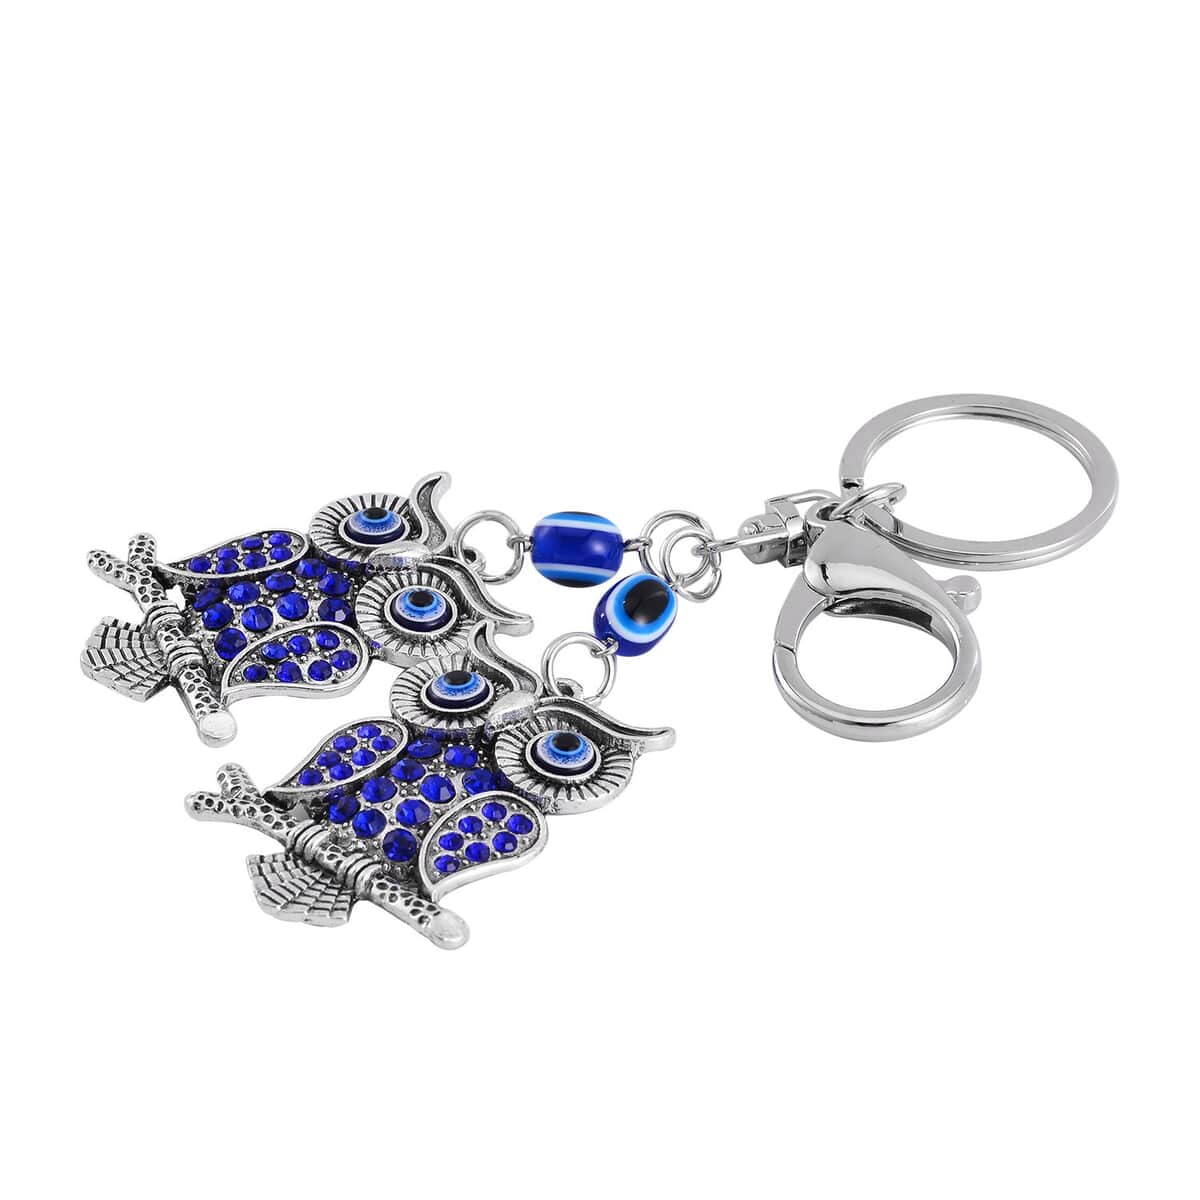 Set of 3 Murano Style, Resin, Blue and White Austrian Crystal Enameled Hamsa, Owl and Eye Keychain in Dualtone, Cute Keychains, Key Holders, Key Rings, Cool Keychains image number 2